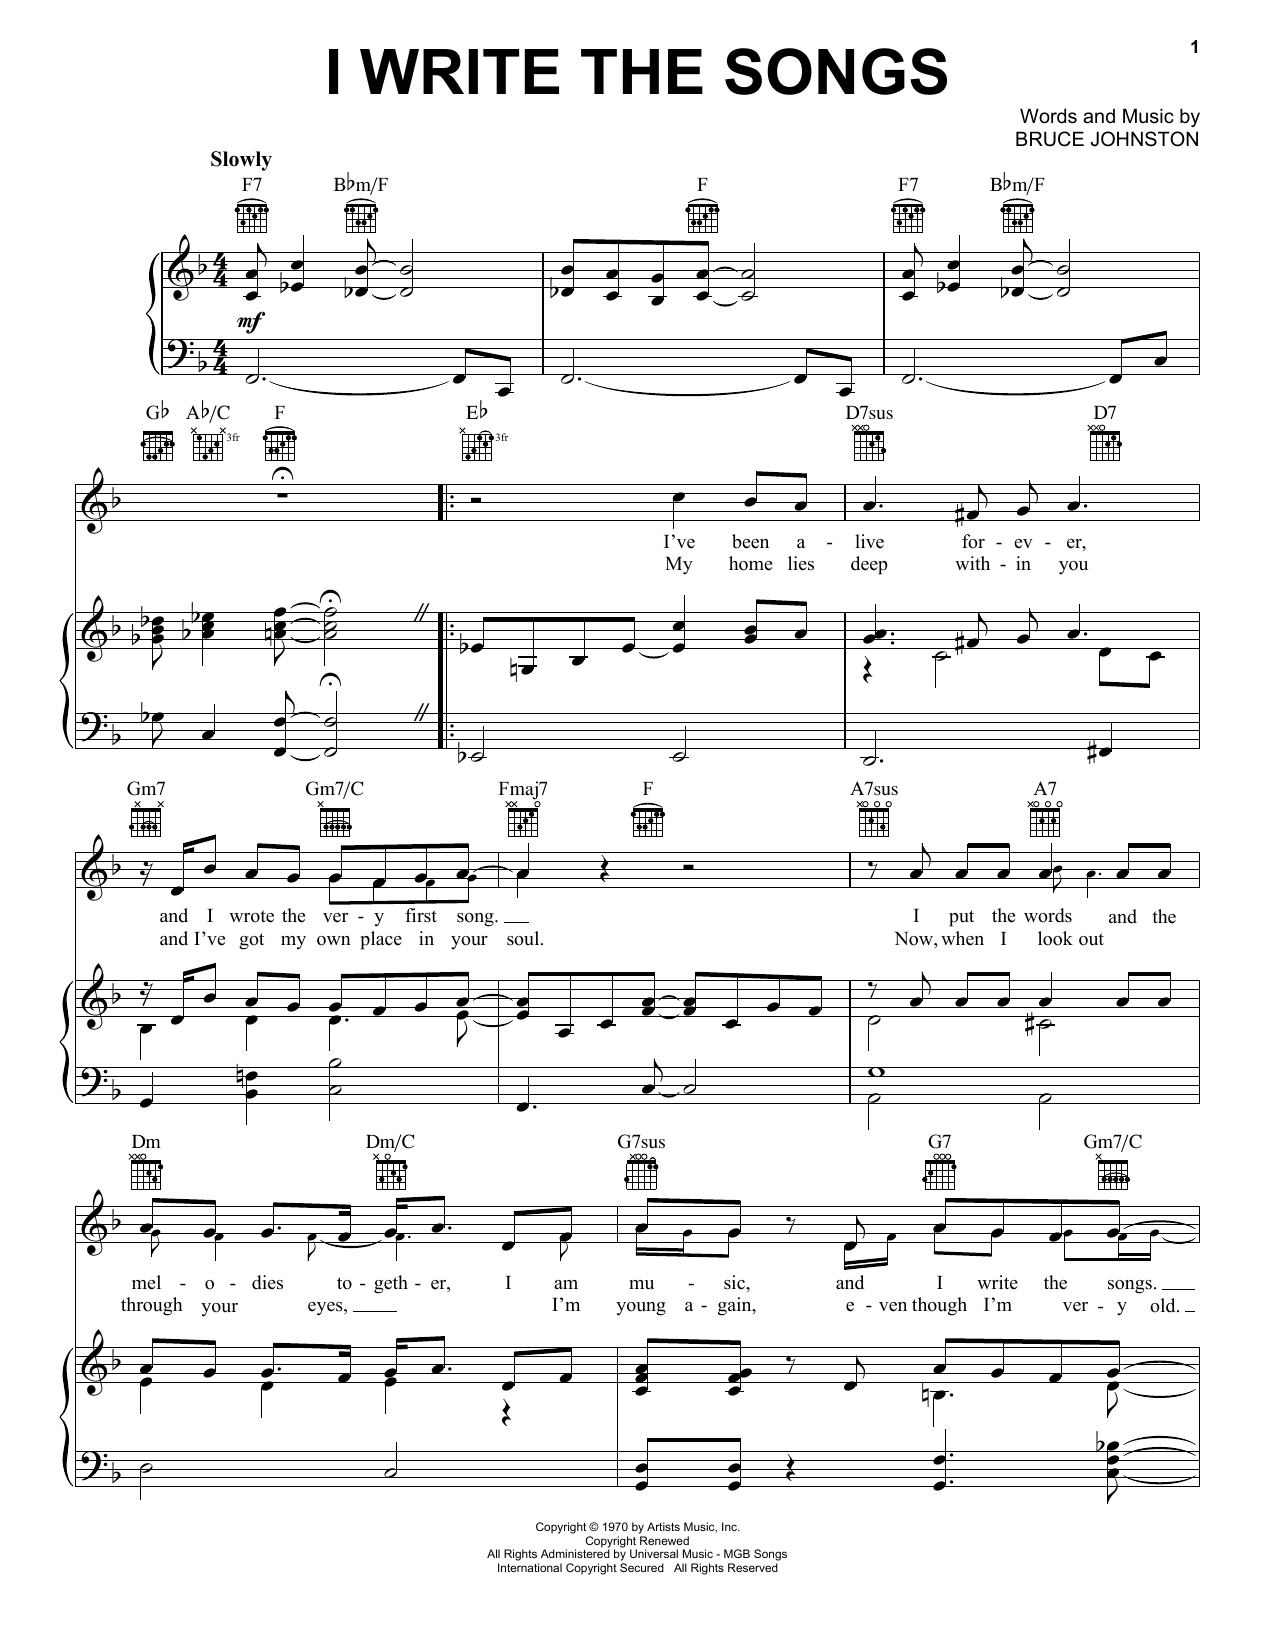 Barry Manilow I Write The Songs sheet music notes printable PDF score